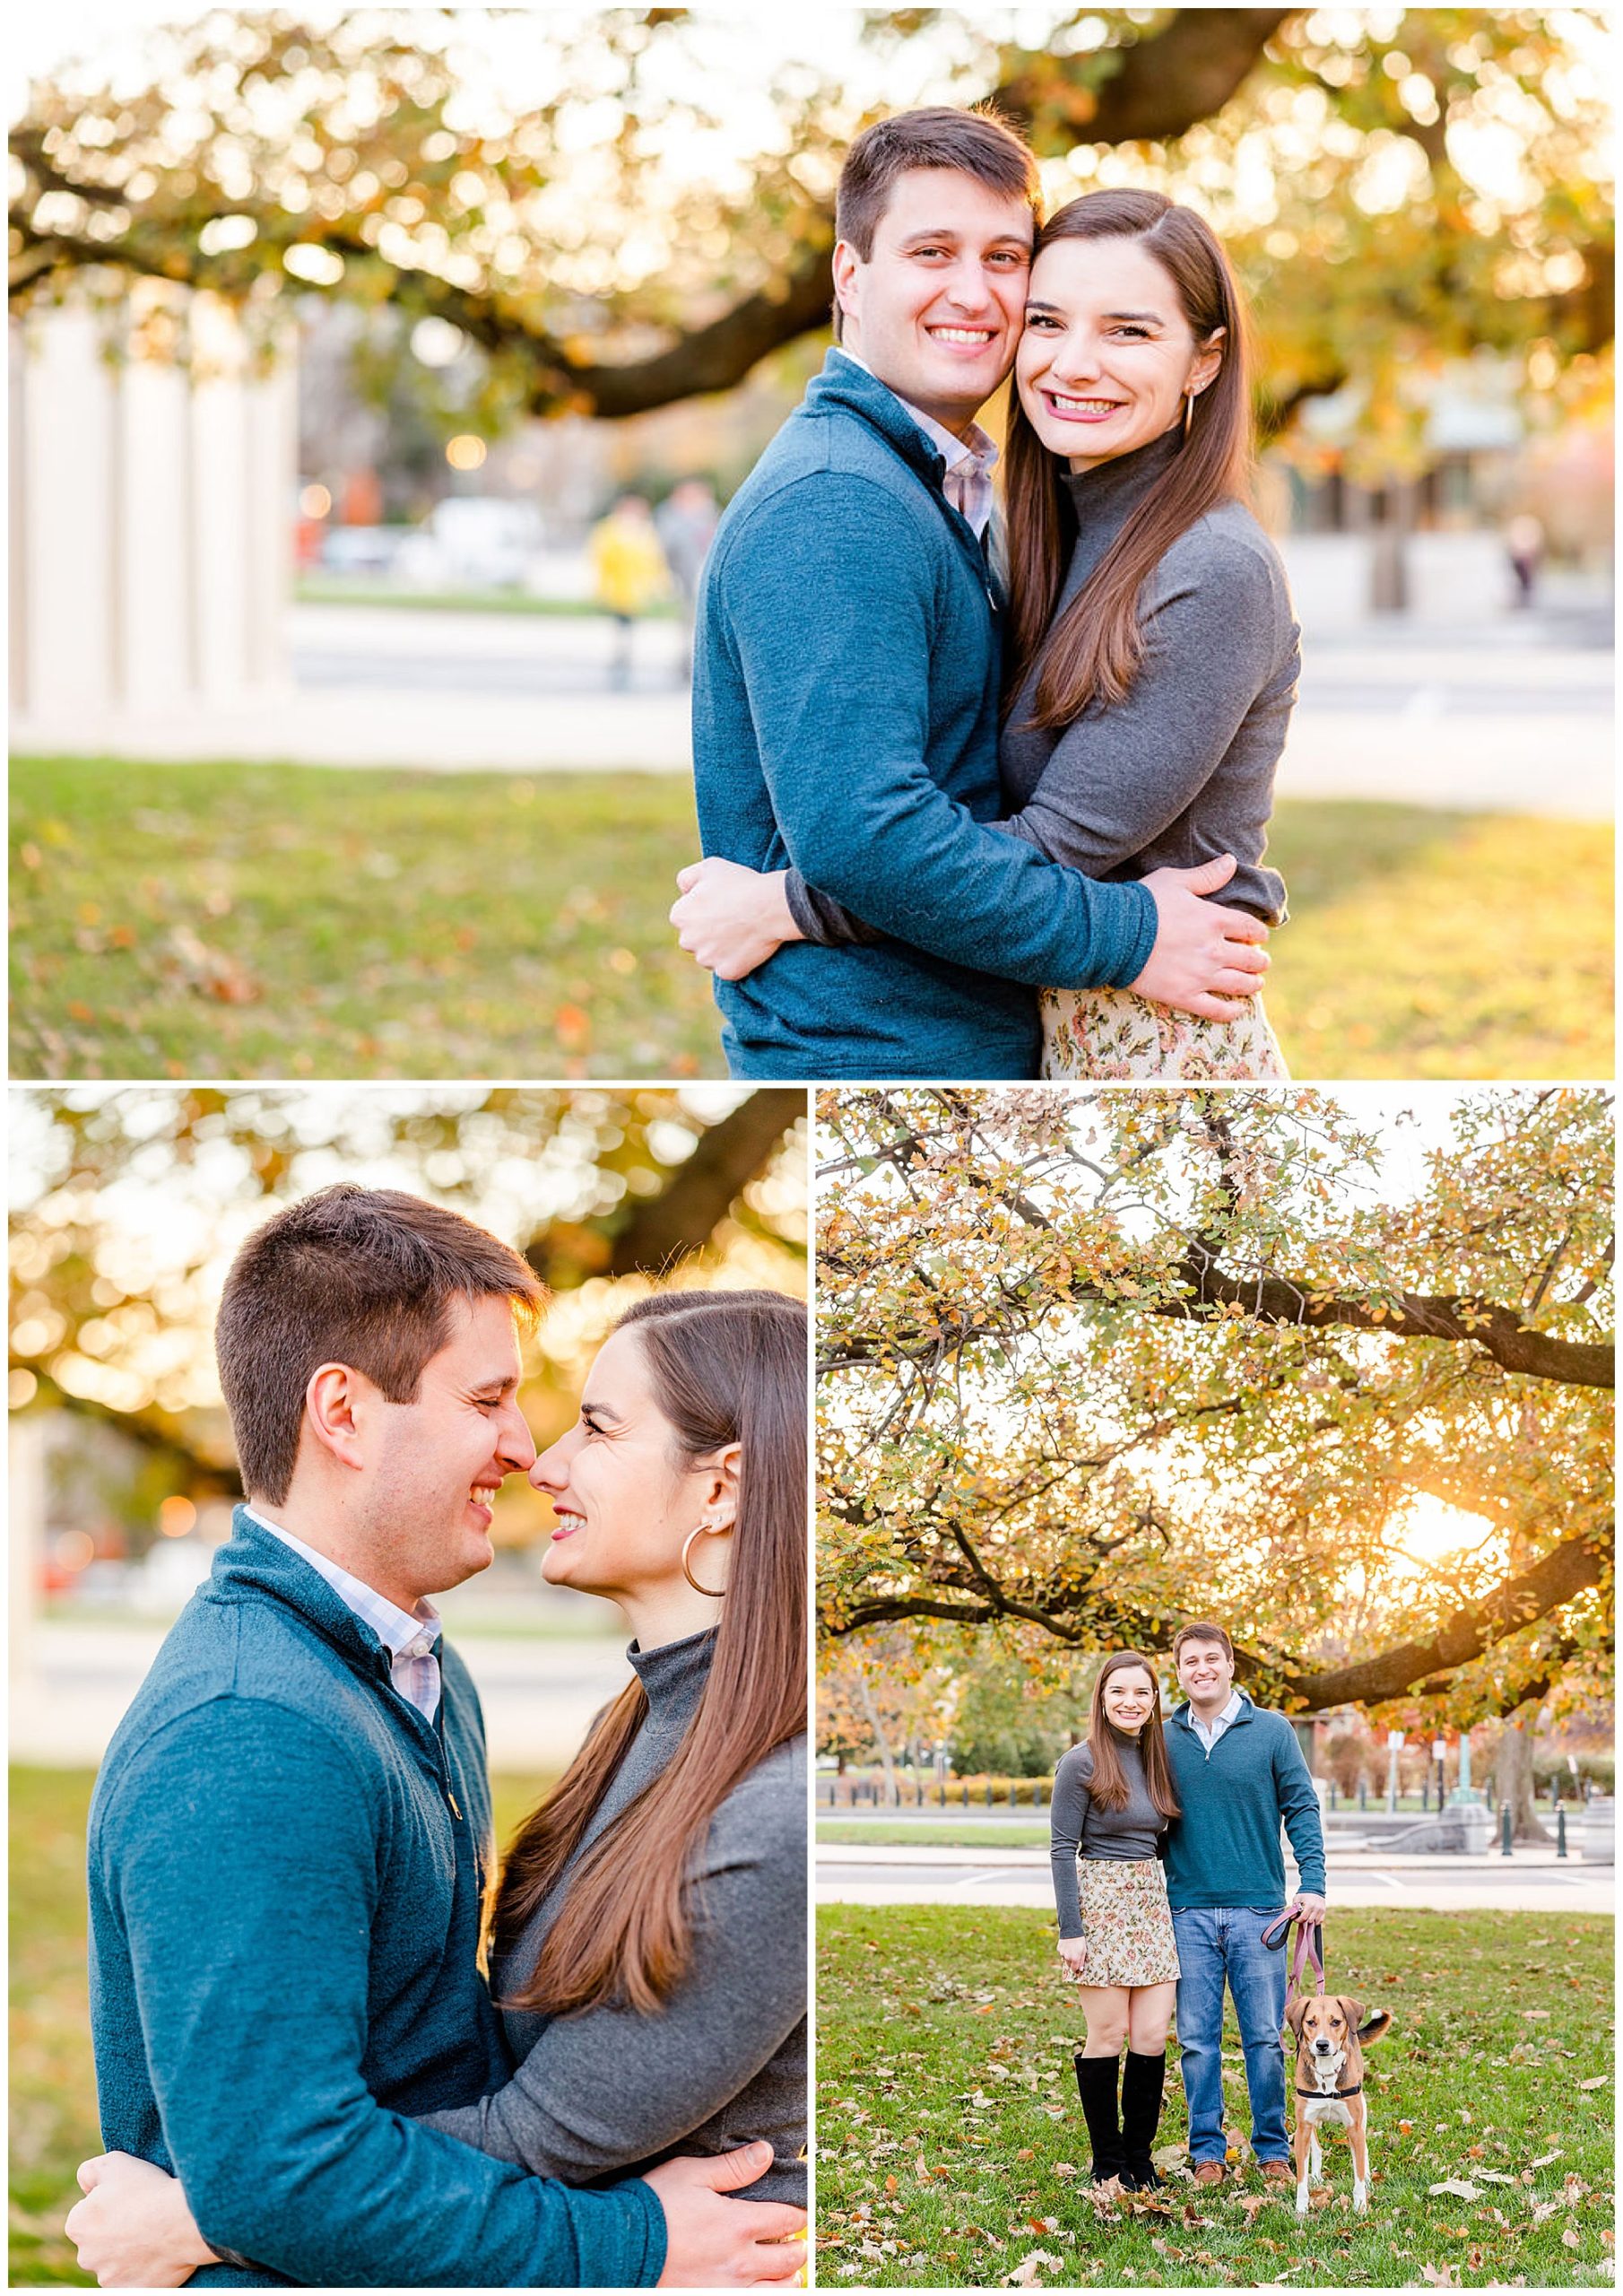 autumn Capitol Hill engagement session, Capitol Hill engagement photos, Capitol Hill photographer, DC engagement photography, DC engagement photographer, DC wedding photography, autumn engagement photos, casual engagement photos, Rachel E.H. Photography, couple smiling, couple with cheeks together, couple smiling under tree